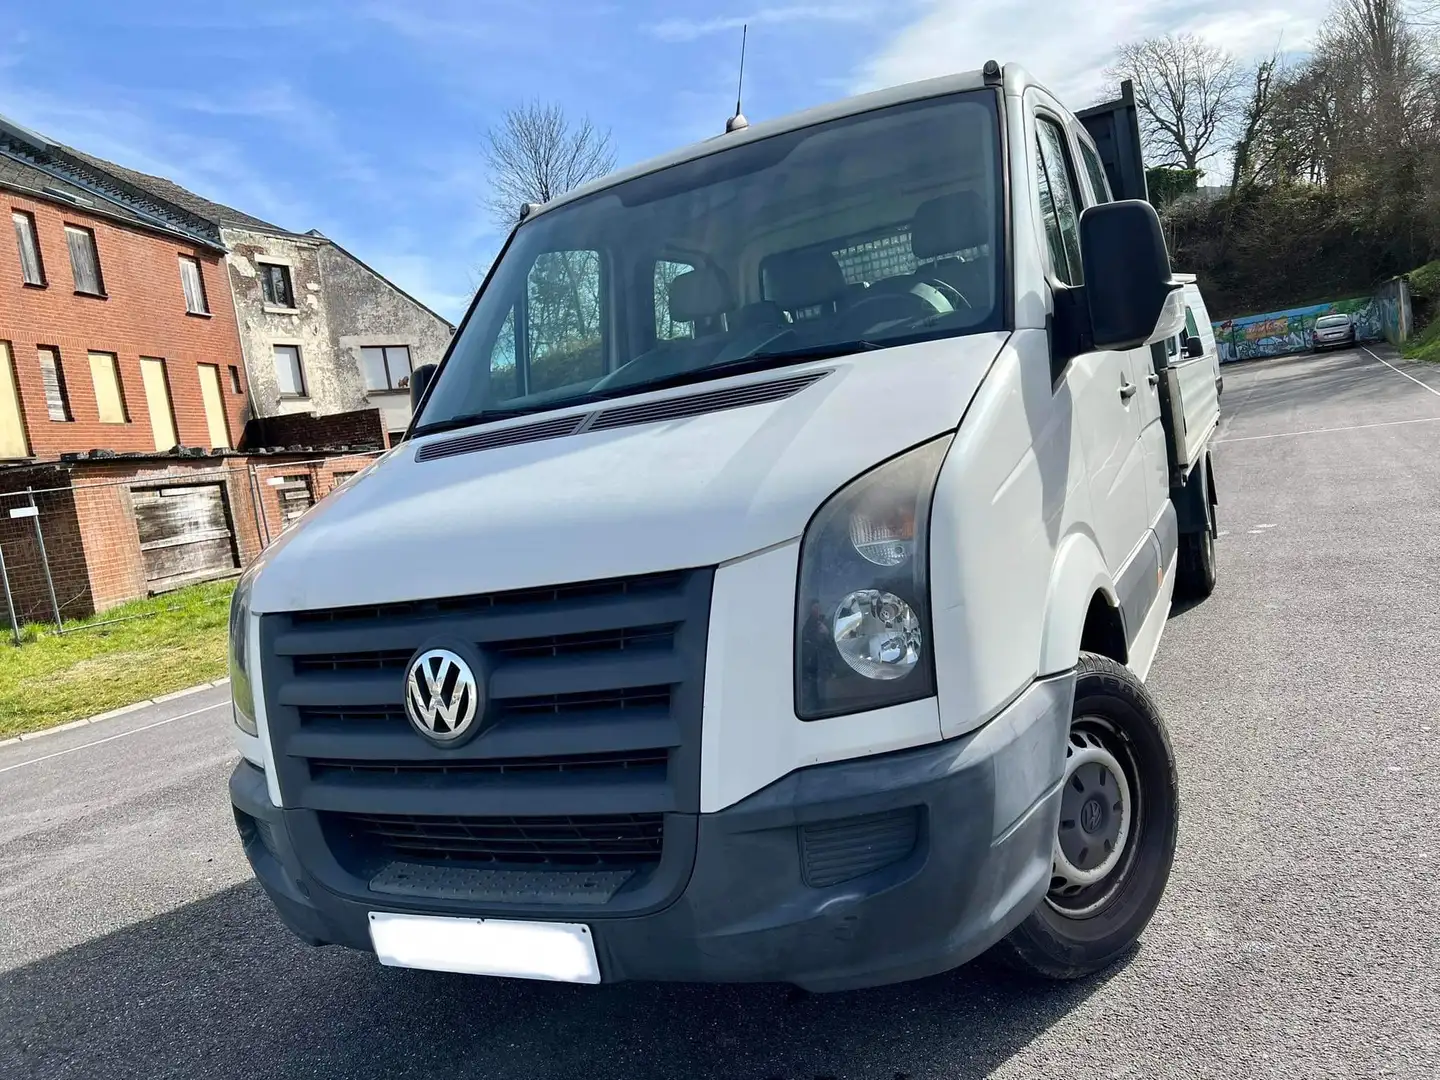 Volkswagen Crafter 2.5 TDI / UTILITAIRE - 7 places / Euro 5 Blanc - 1